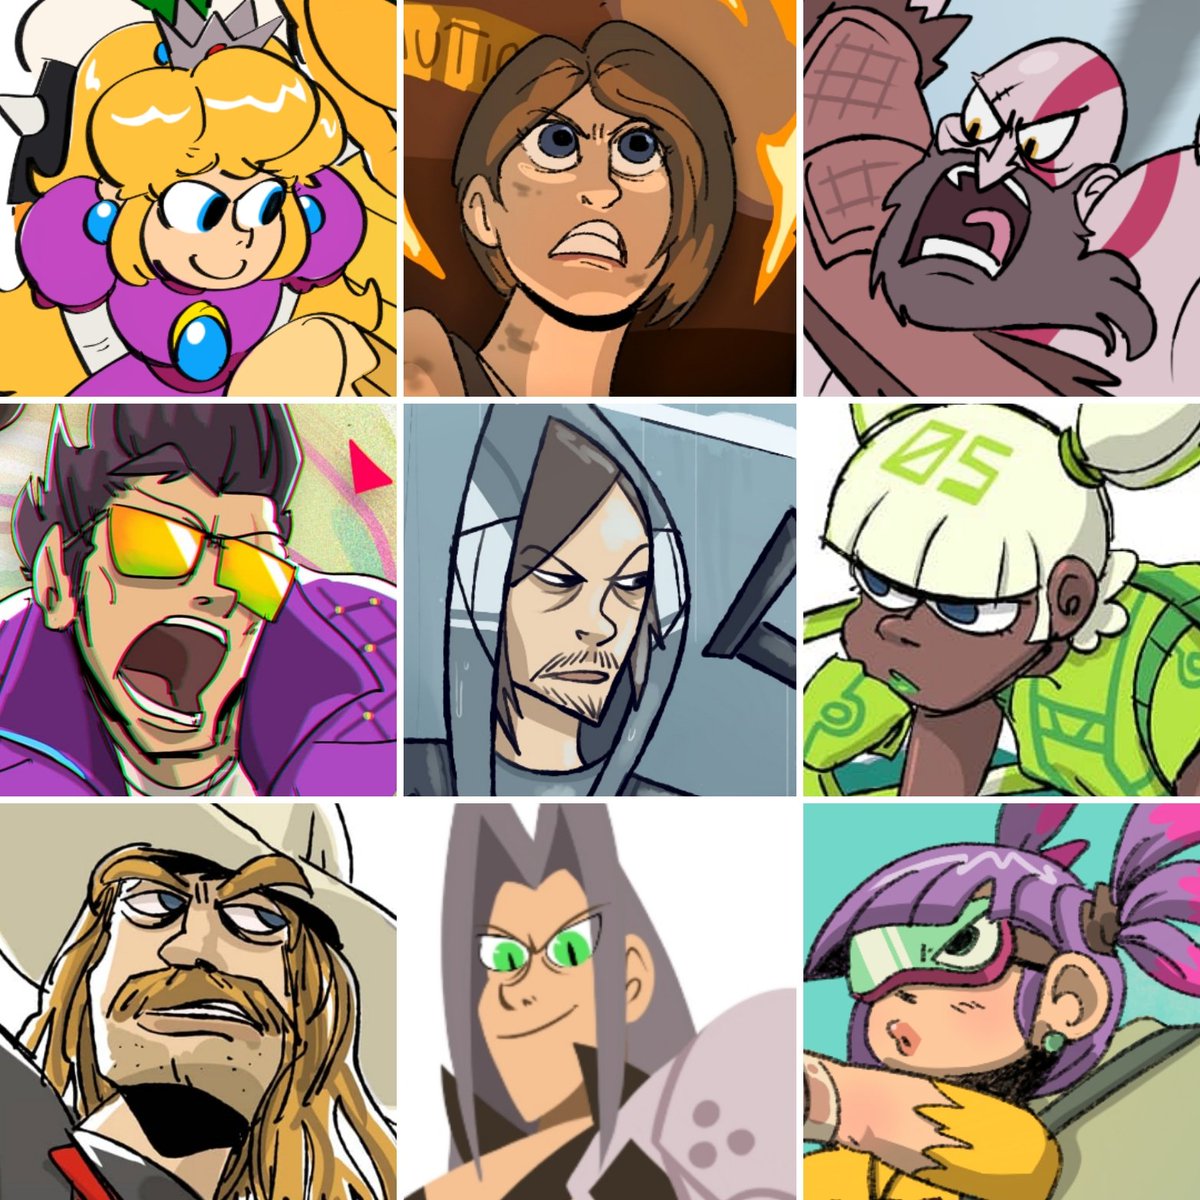 bandwagon time
People and Monsters
#faceyourart2020 #faceyourart 